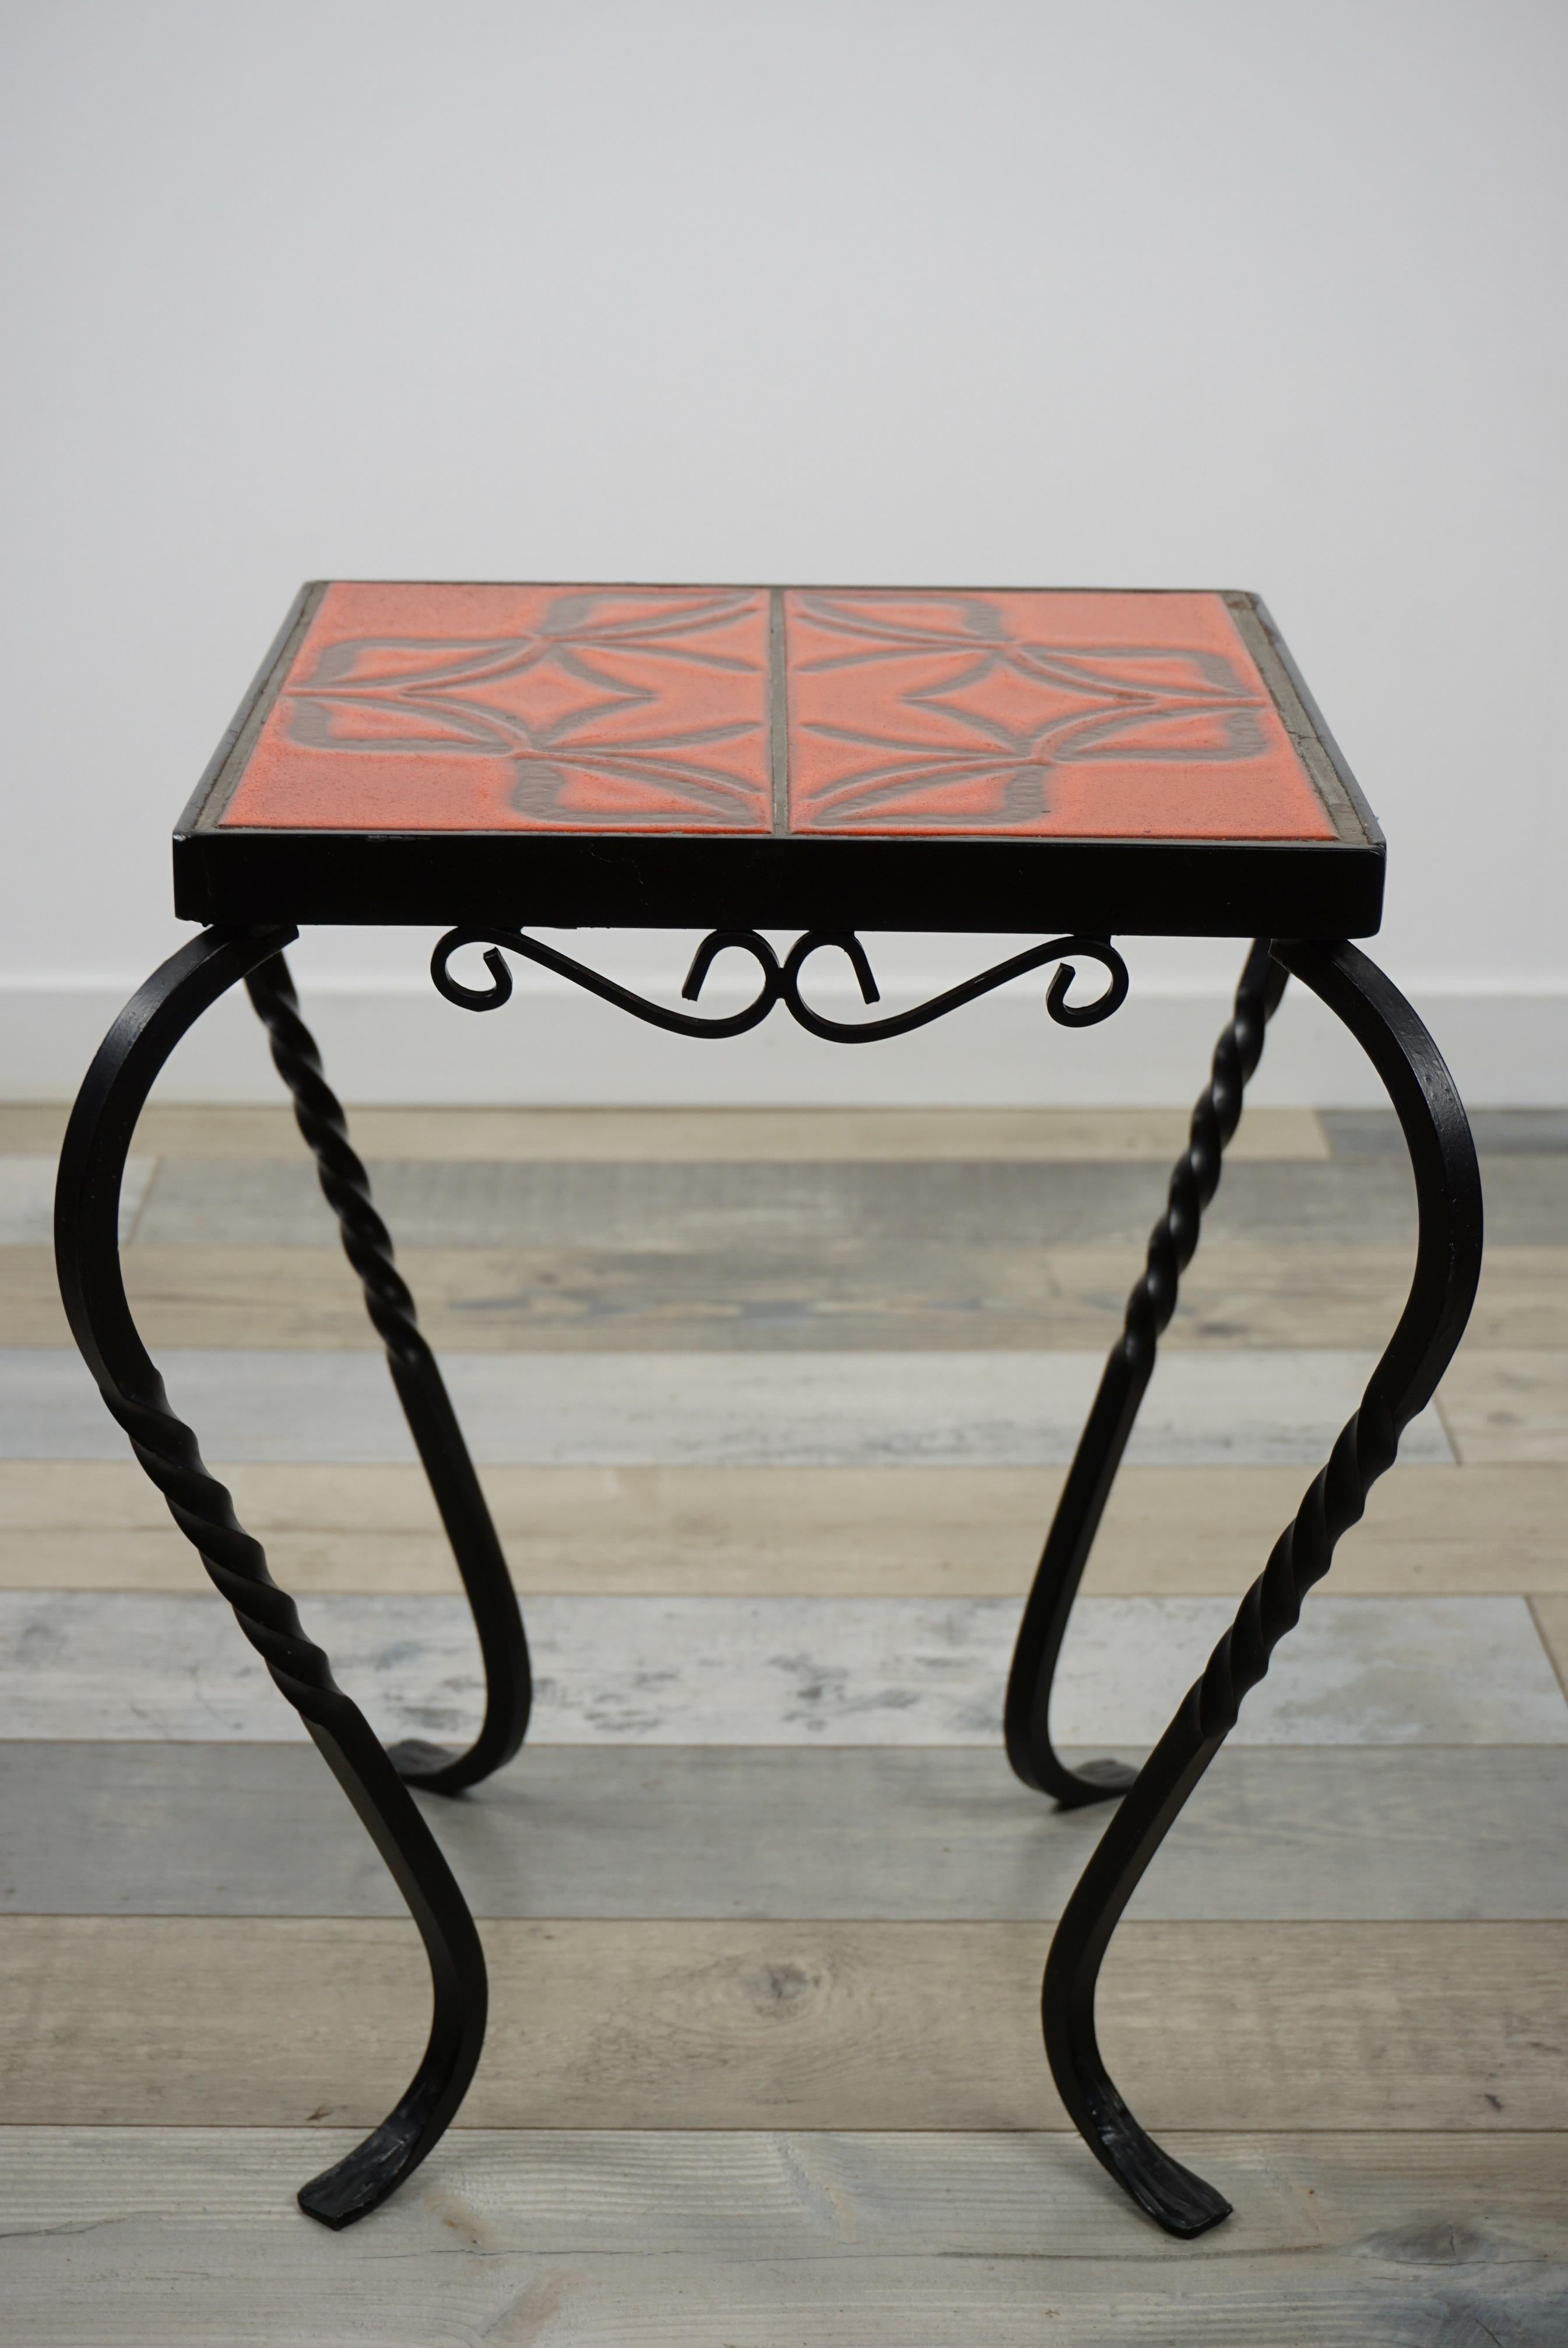 French design wrought iron and ceramic side table very decorative composed of an aerial wrought iron structure and a square ceramic tray (32cm/32cm).